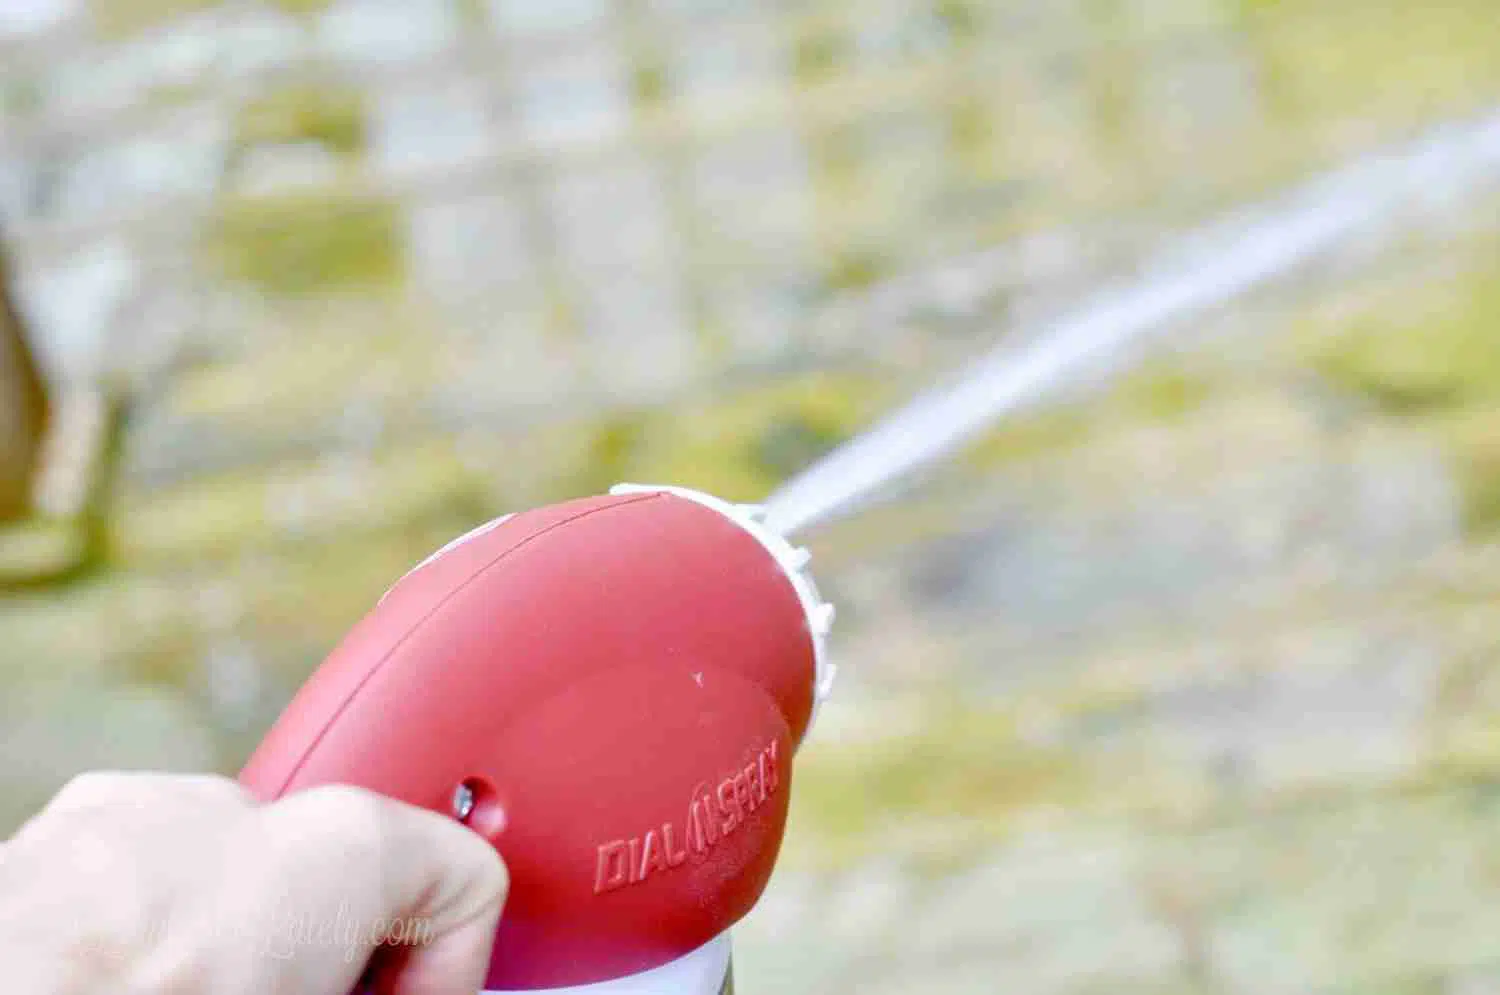 holding a red sprayer nozzle.